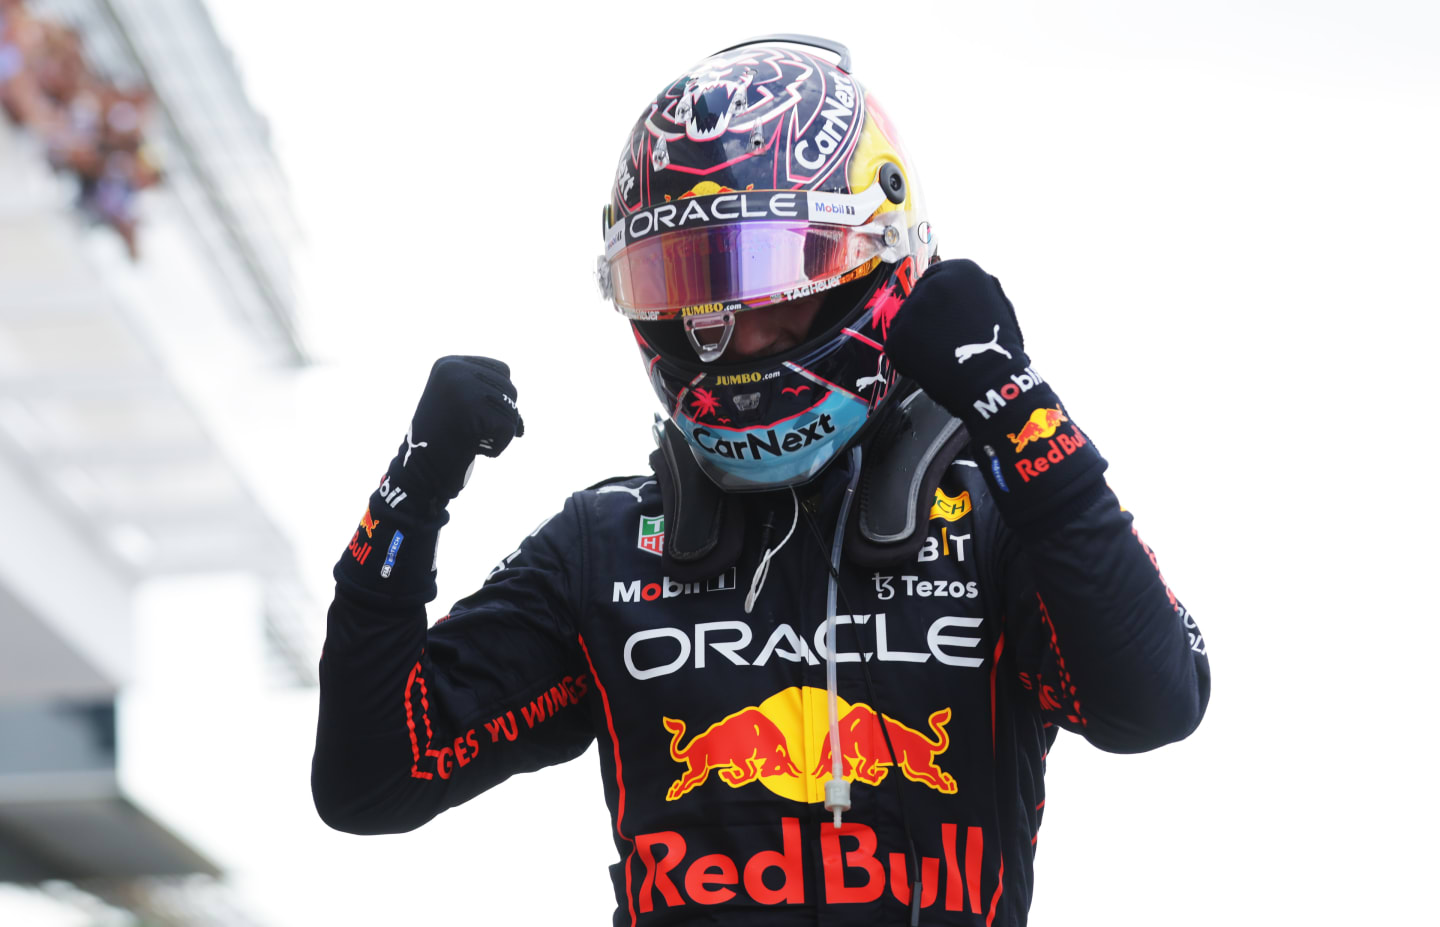 MIAMI, FLORIDA - MAY 08: Race winner Max Verstappen of the Netherlands and Oracle Red Bull Racing celebrates in parc ferme during the F1 Grand Prix of Miami at the Miami International Autodrome on May 08, 2022 in Miami, Florida. (Photo by Mark Thompson/Getty Images)